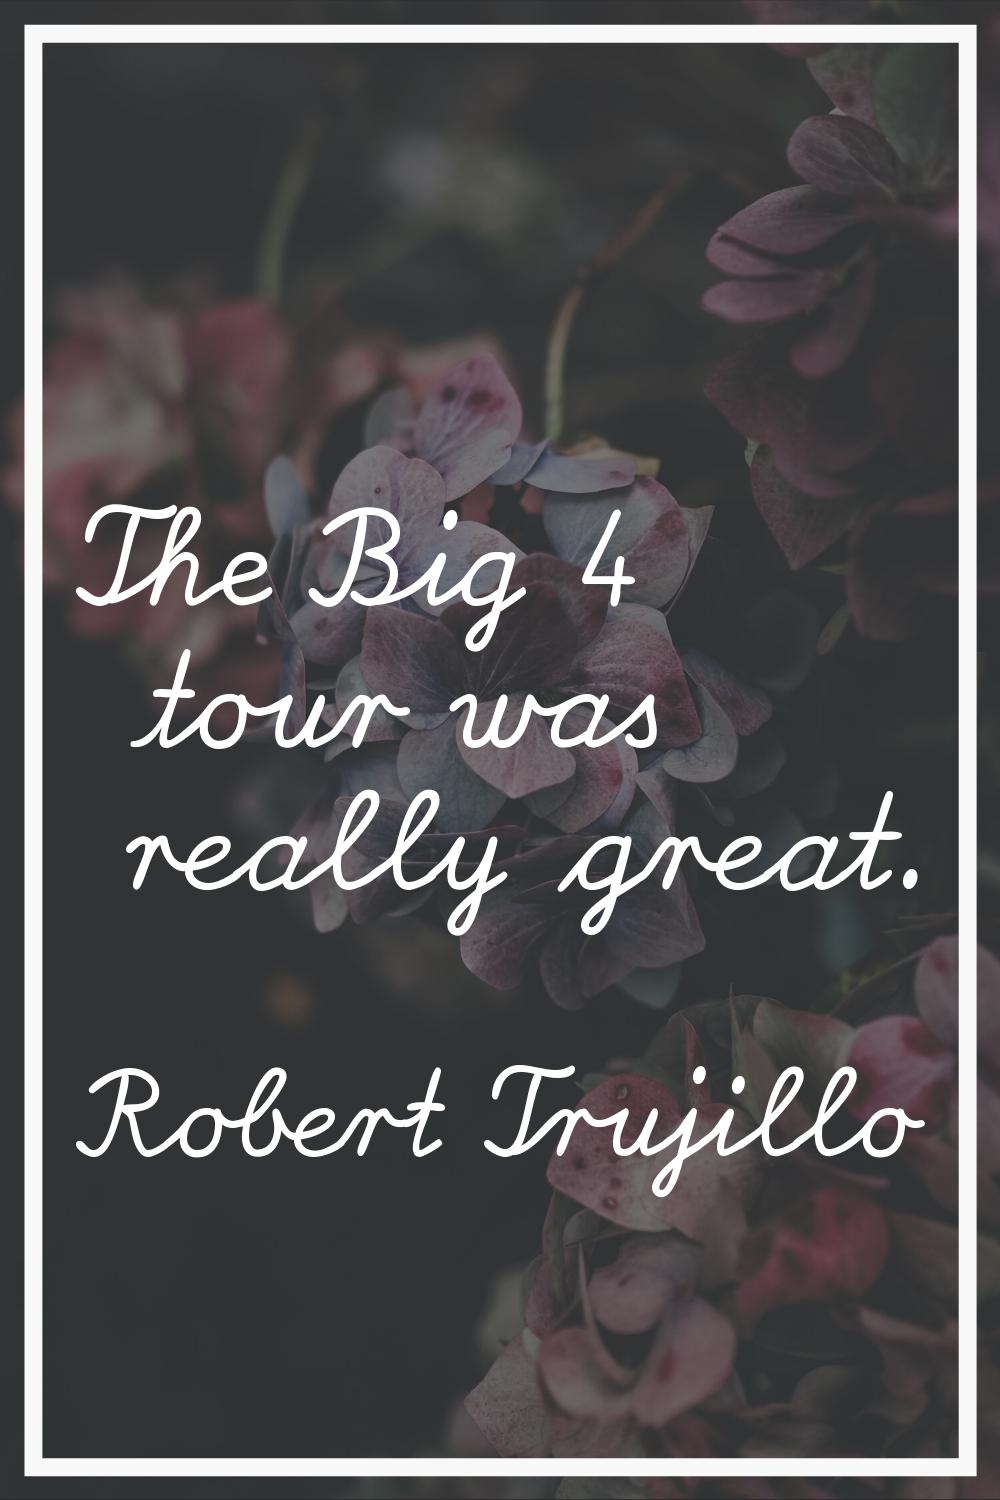 The Big 4 tour was really great.